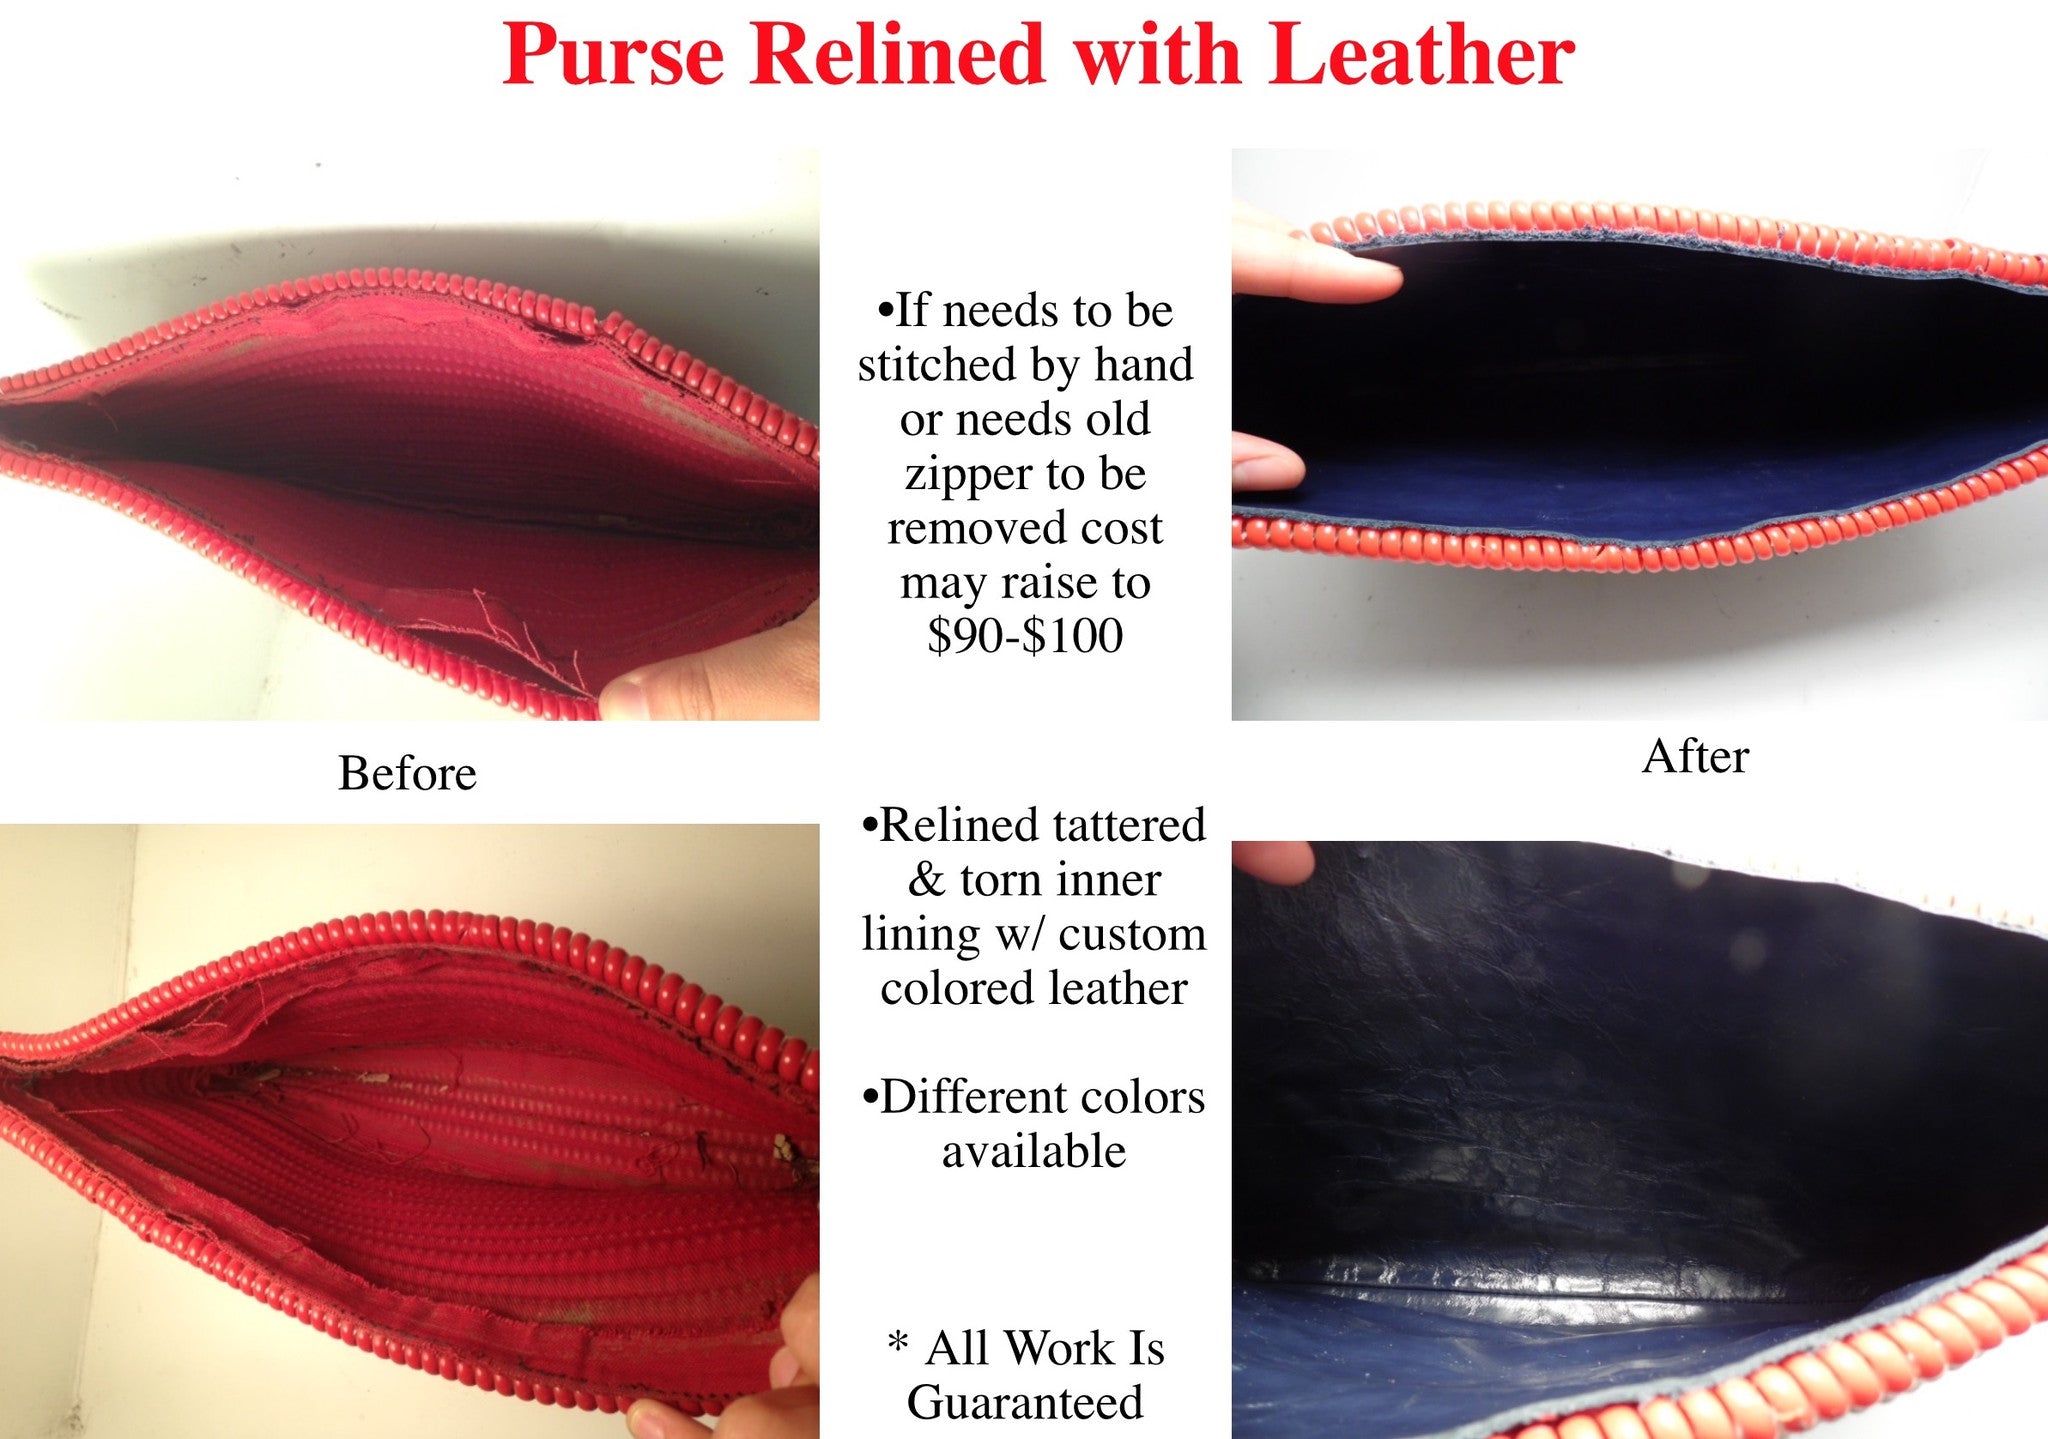 How to remove inner lining from Louis Vuitton bag